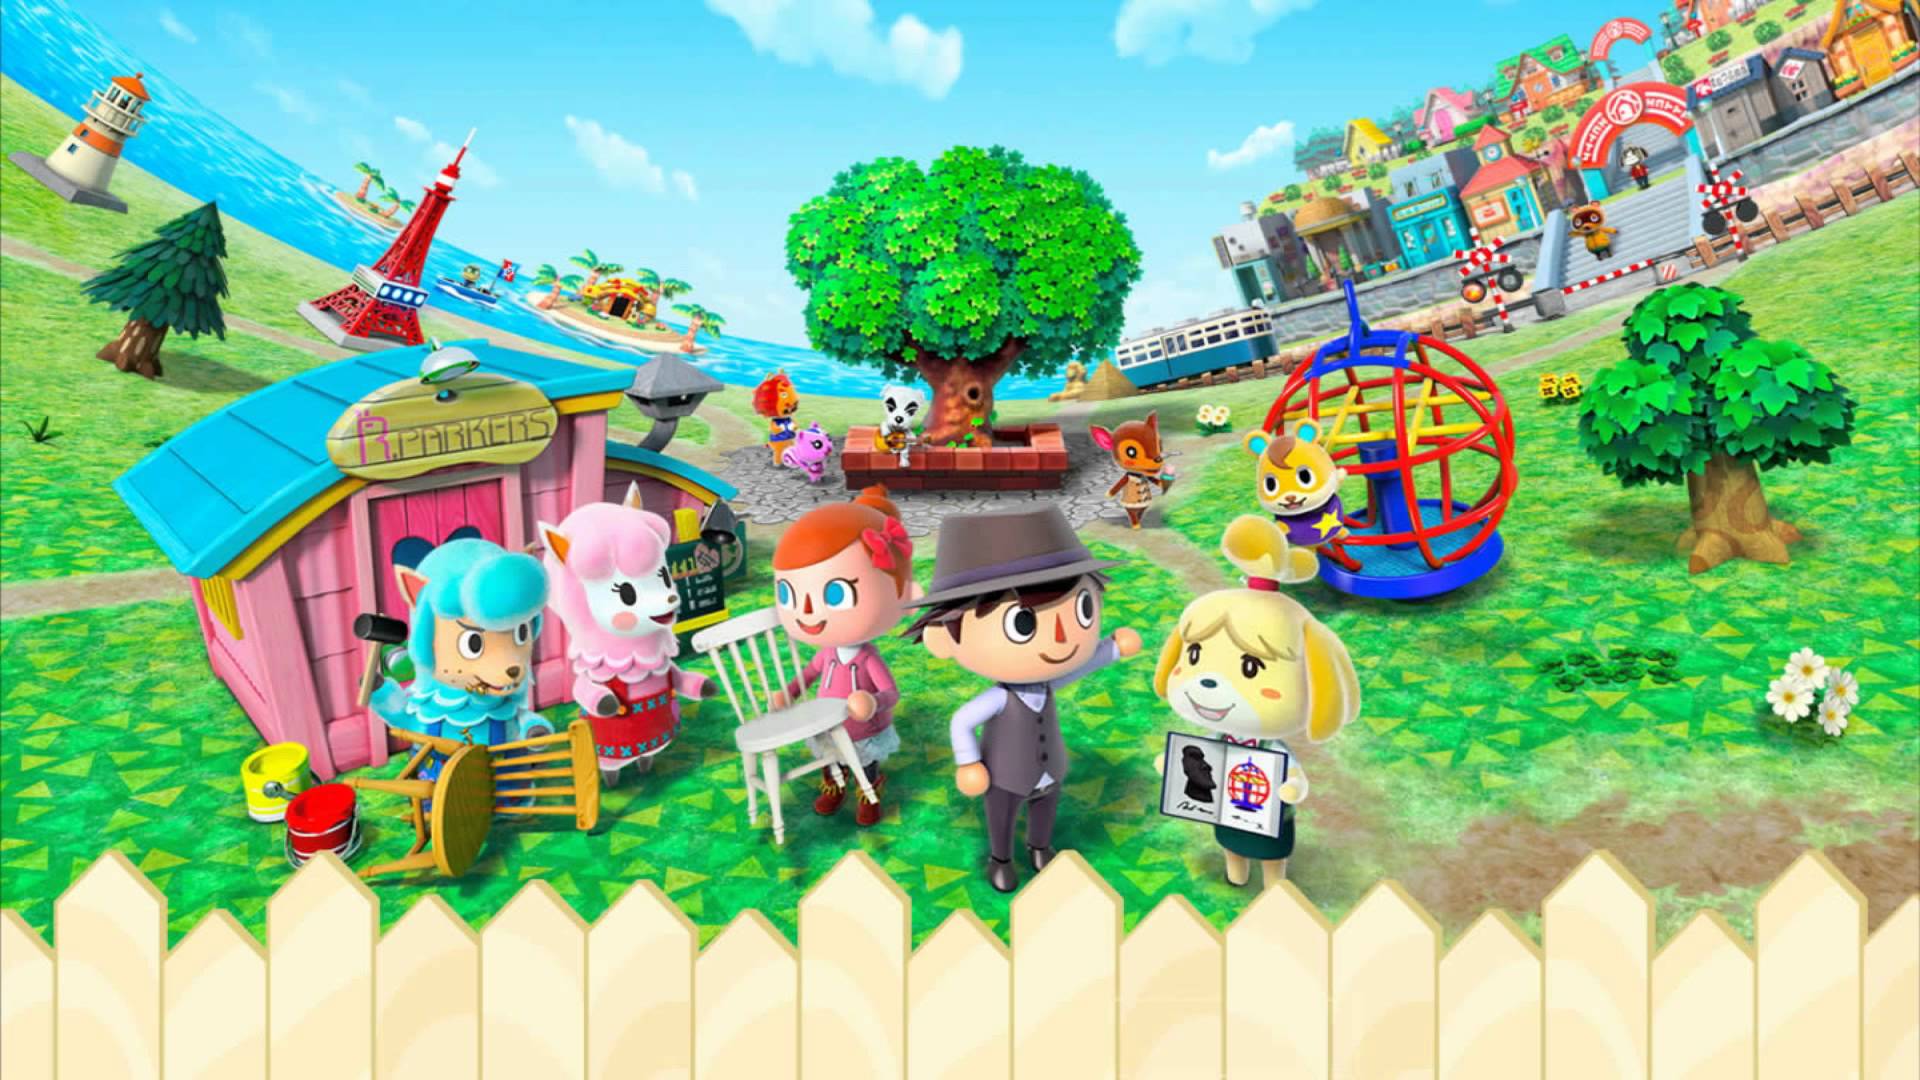 Why Nintendo chose &#039;Animal Crossing&#039; over &#039;Mario&#039; for mobile